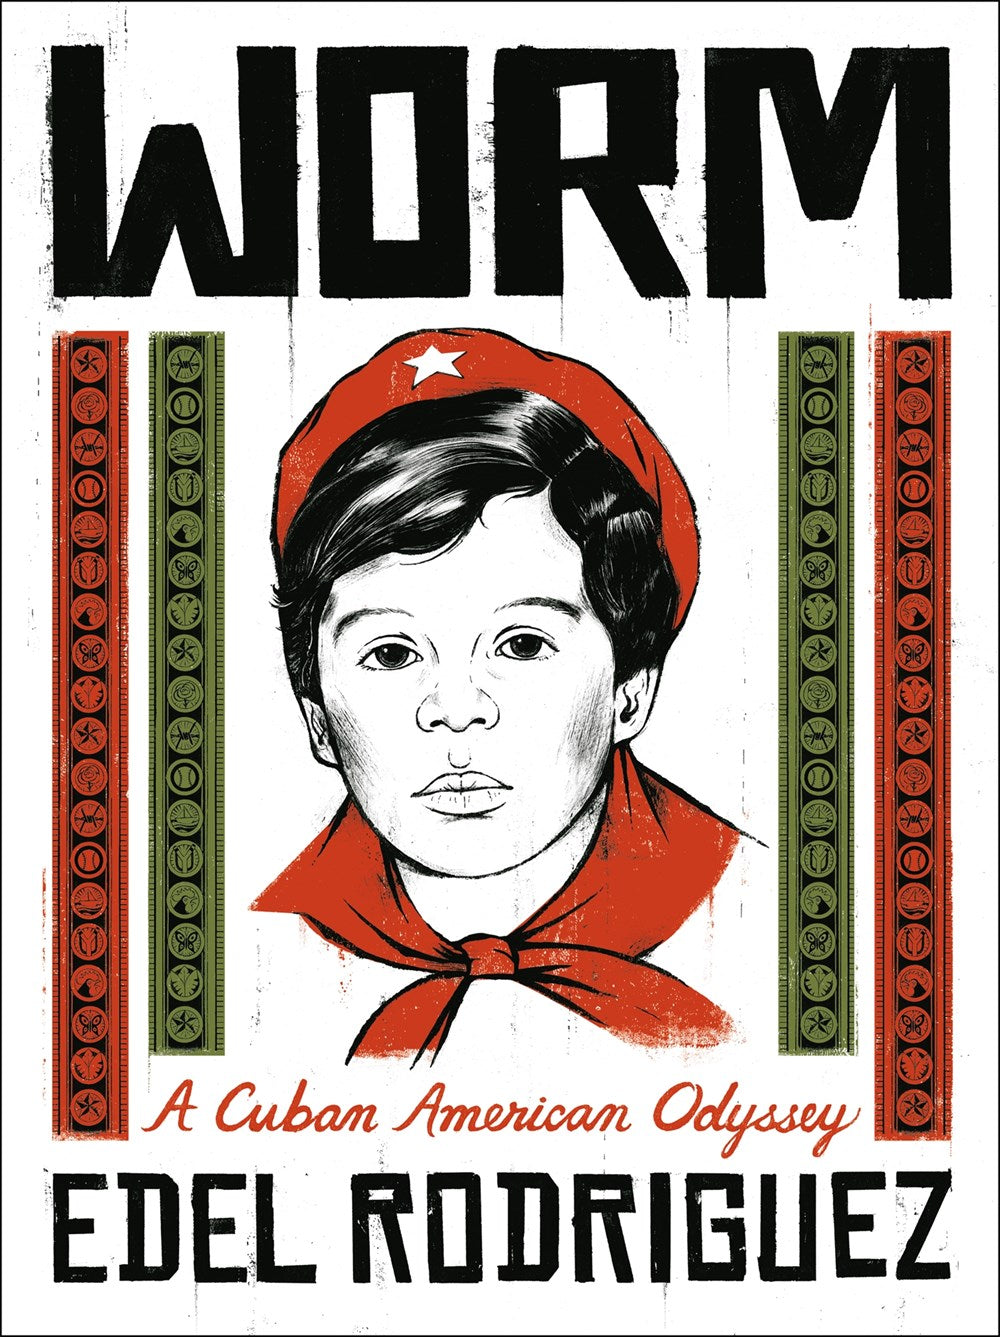 WORM: A Cuban American Odyssey by Edel Rodriguez (Hardcover)